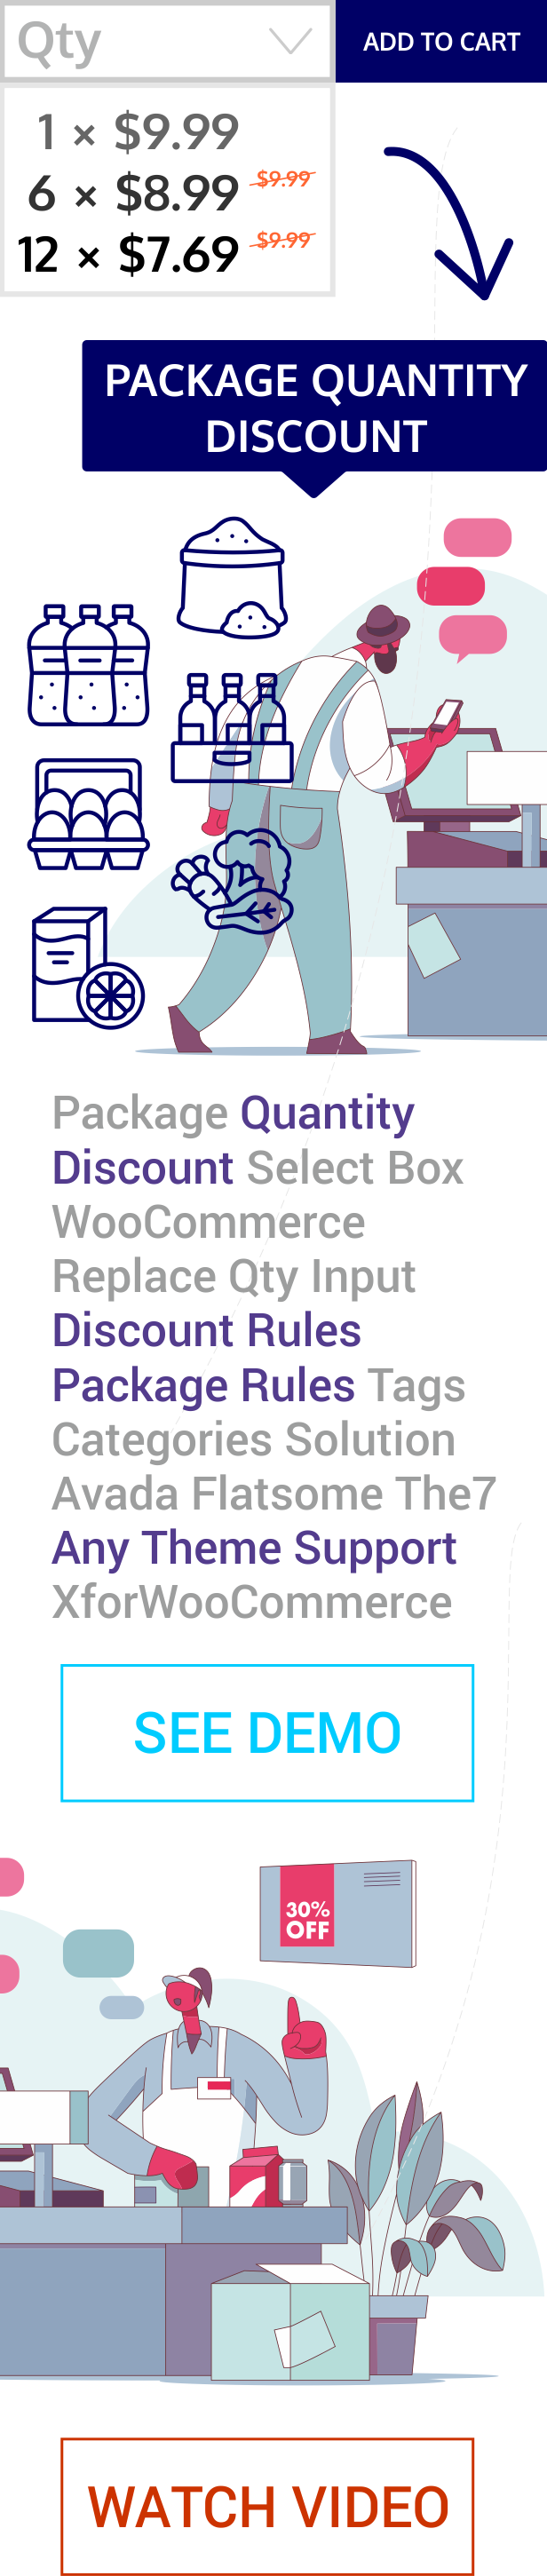 Package Quantity Discount for WooCommerce - 2